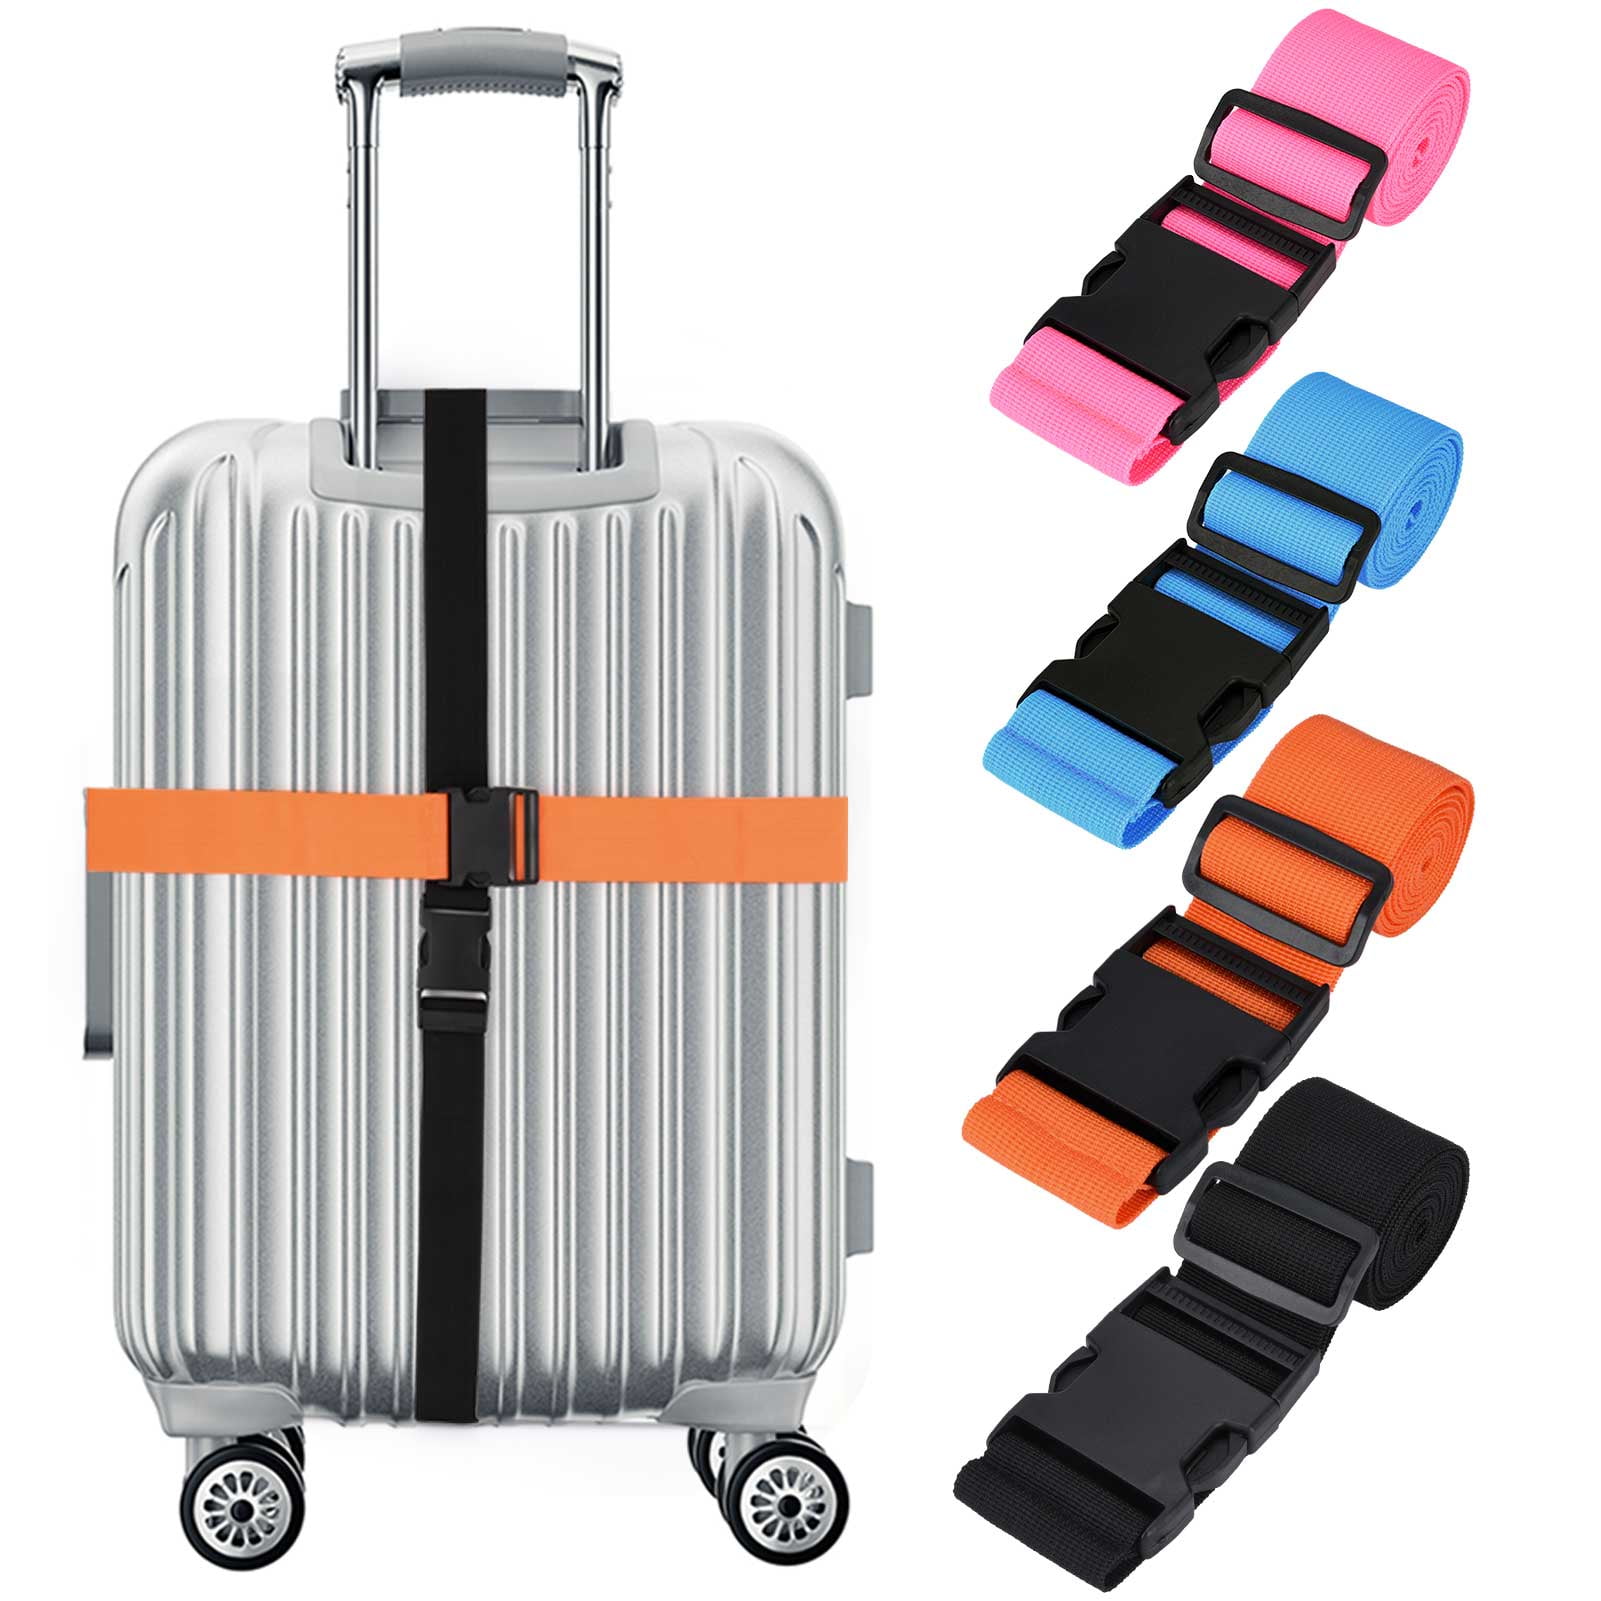 sixwipe 4 Pack Luggage Straps, Suitcase Luggage Strap, Travel Adjustable  Suitcase Belts with Quick Release Buckle, Non-Slip Security Belts for All  Suitcase Baggage(Pink,Blue,Orange,Black) 